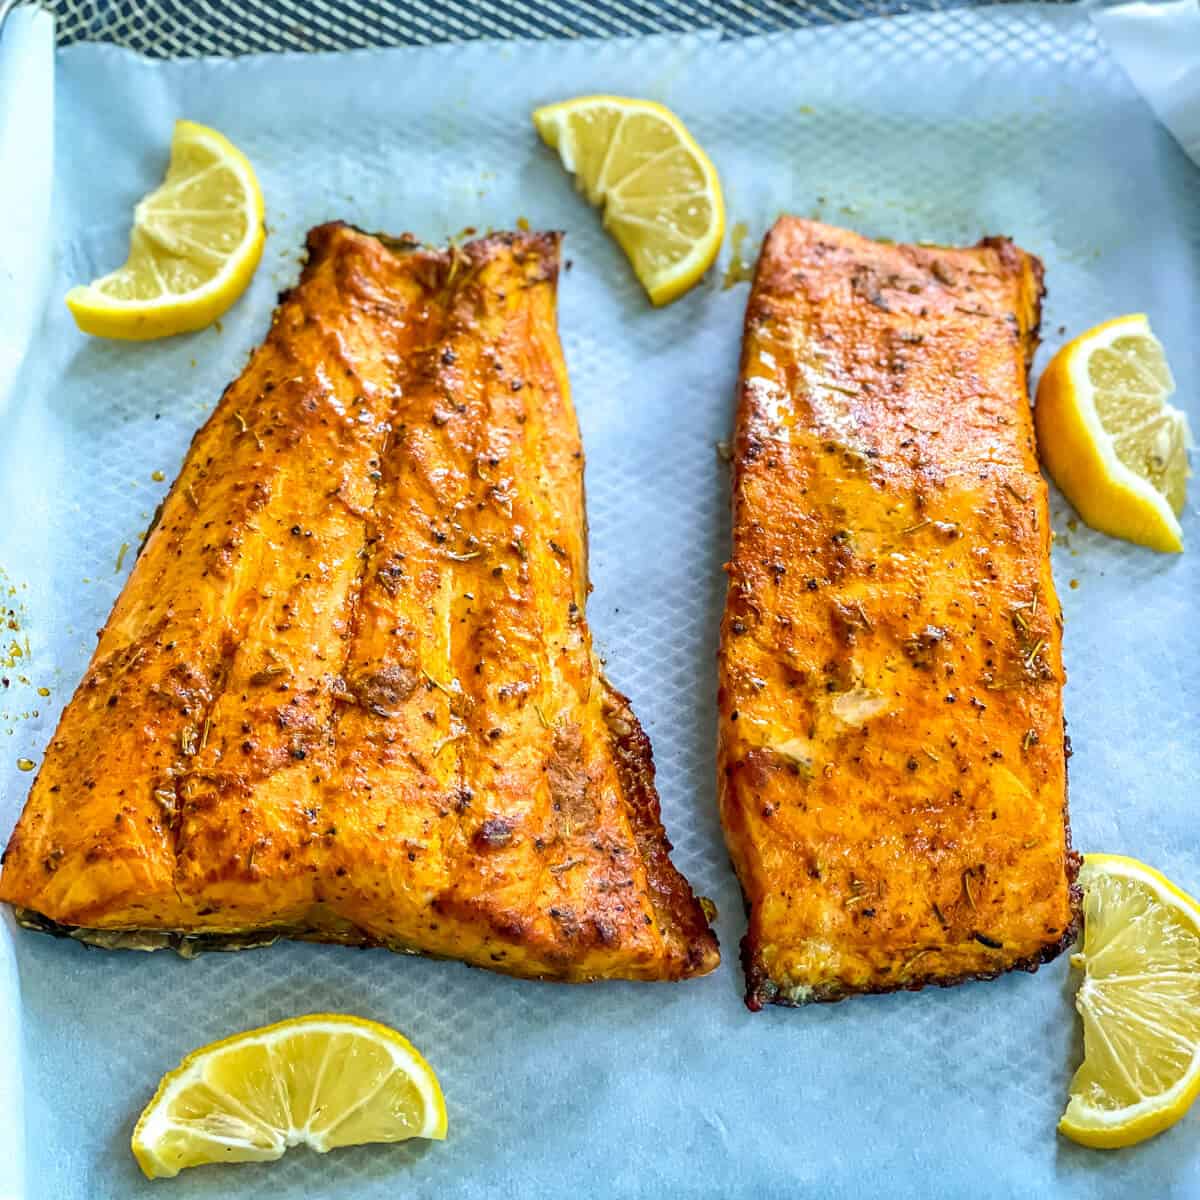 Two pieces of cooked and seasoned salmon, garnished with citrus.